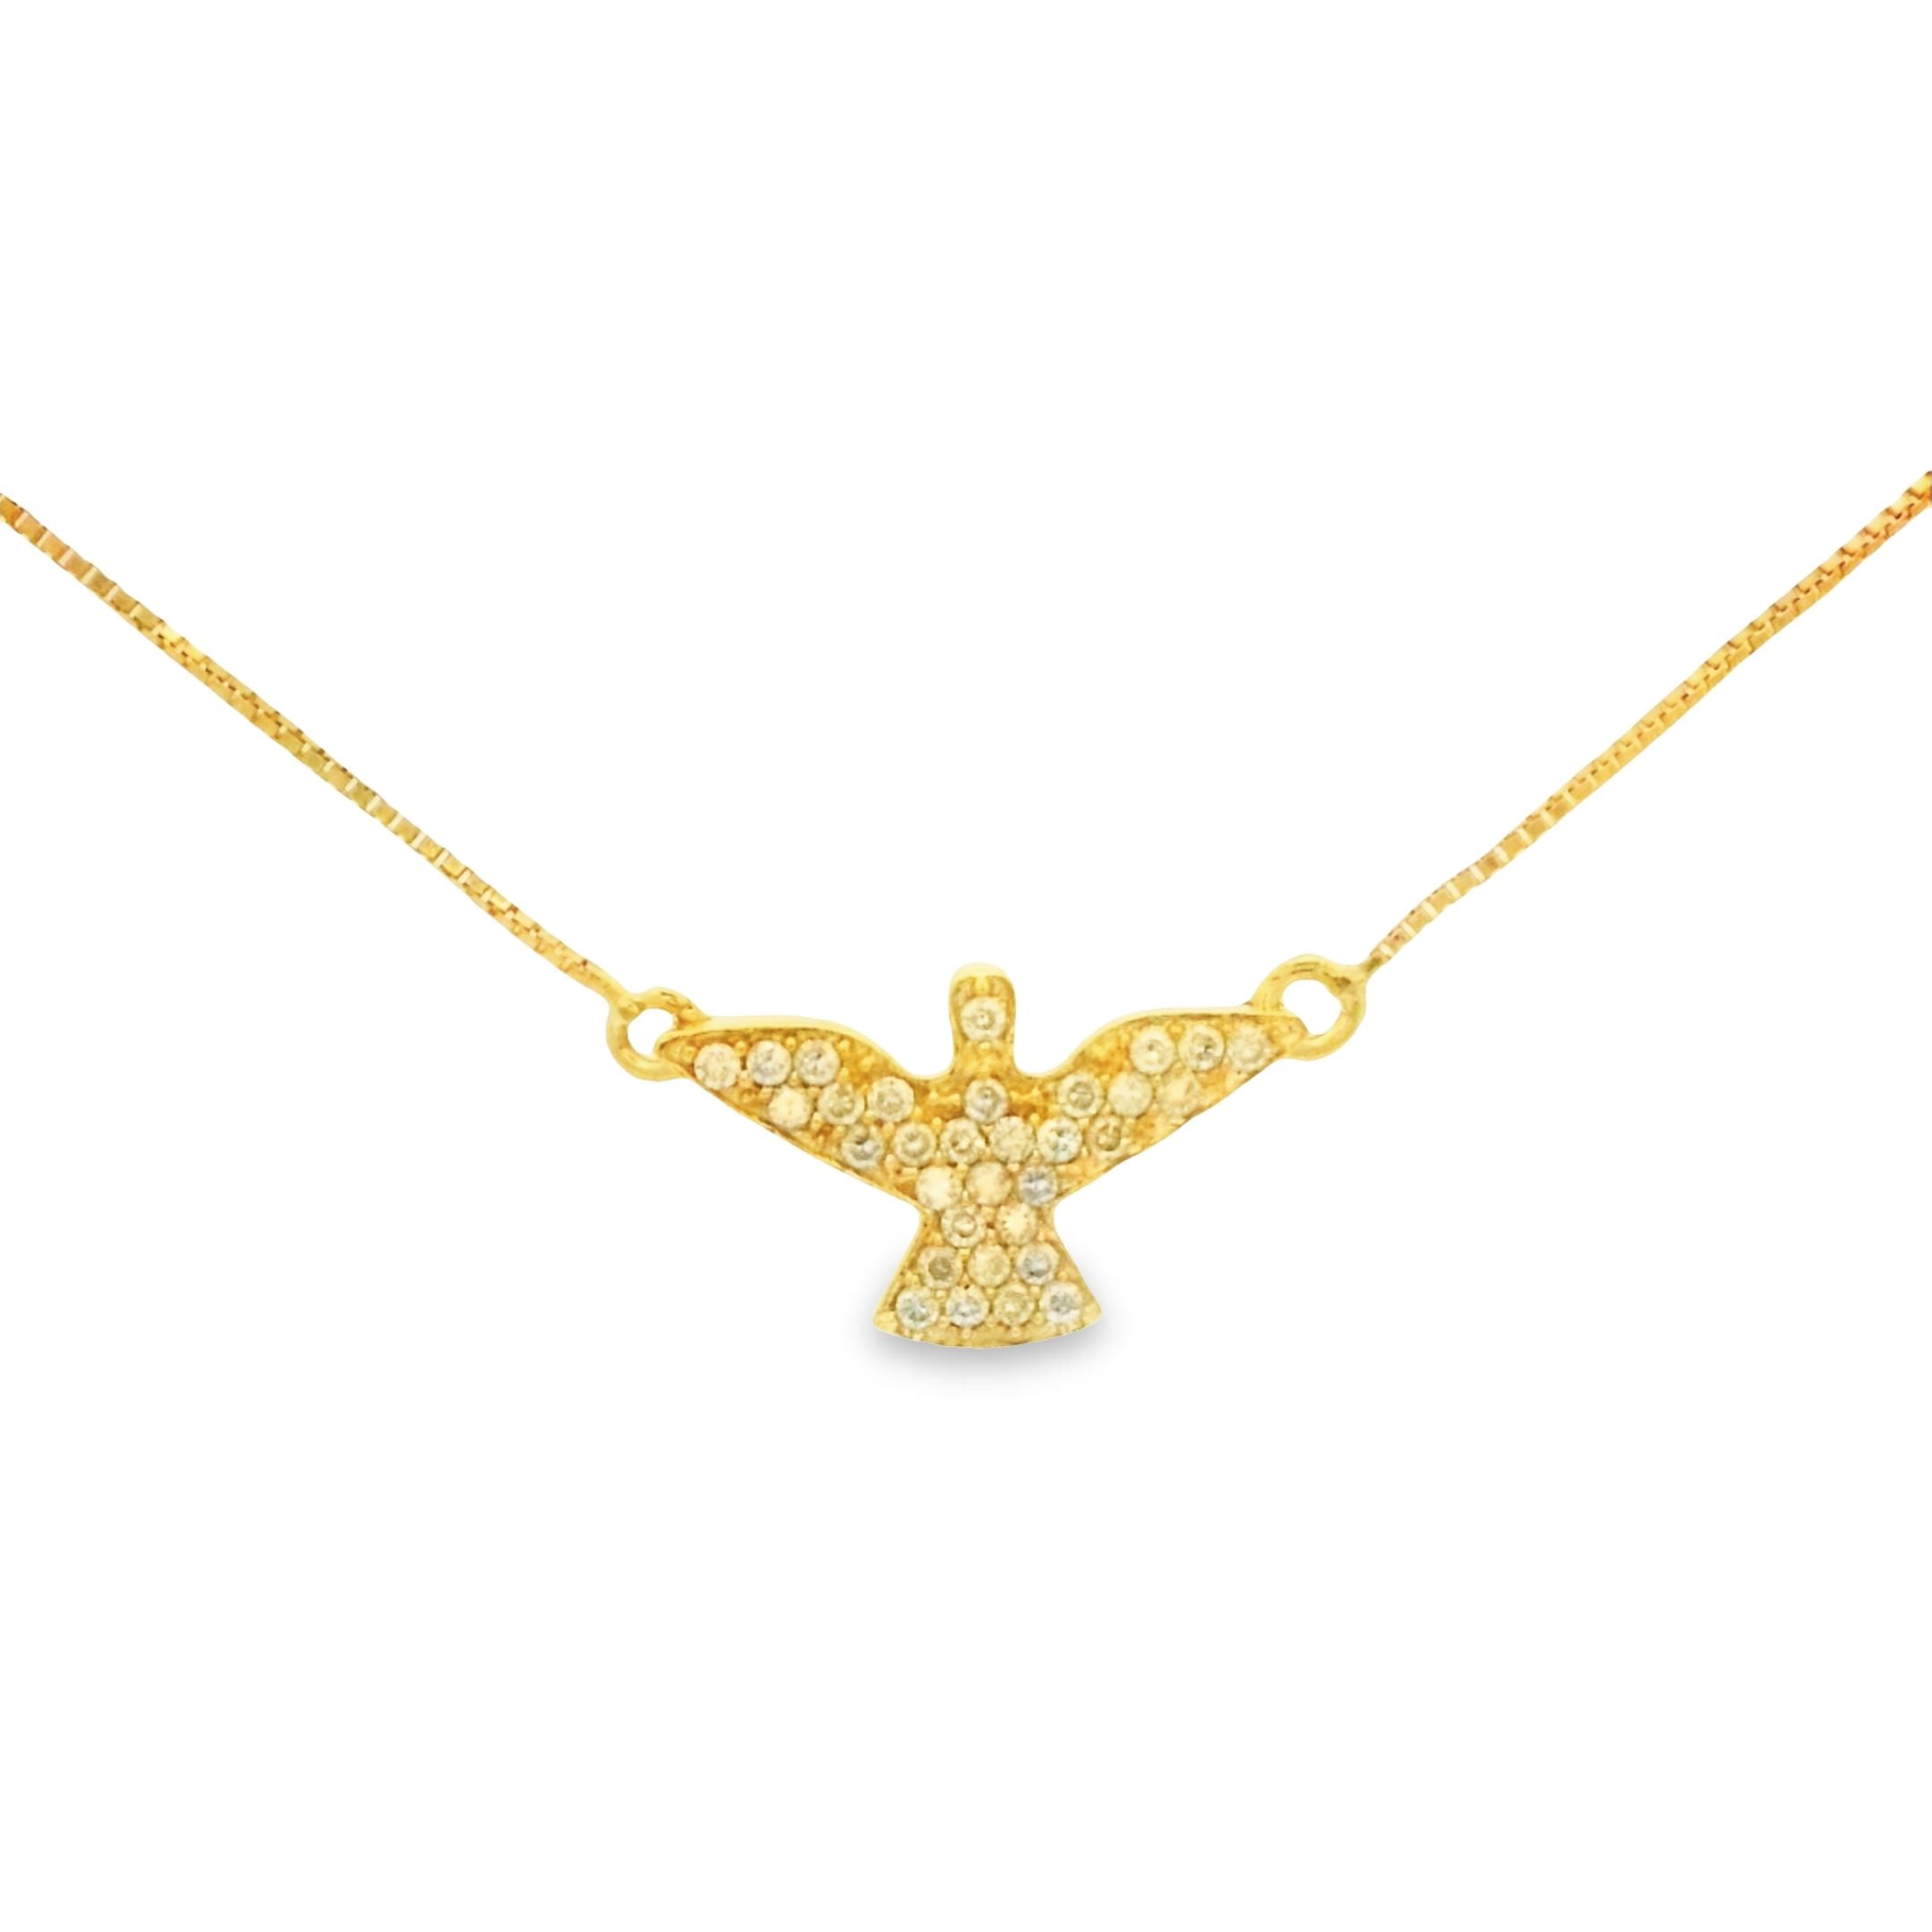 Introducing the perfect way to express your faith - our stunning diamond-paved Holy Spirit Pendant Necklace crafted from 18k yellow gold. The delicate, yet captivating charm adds a sparkle to your look and captures the admiration and awe of everyone who sees it. Cherish your faith and make it shine!